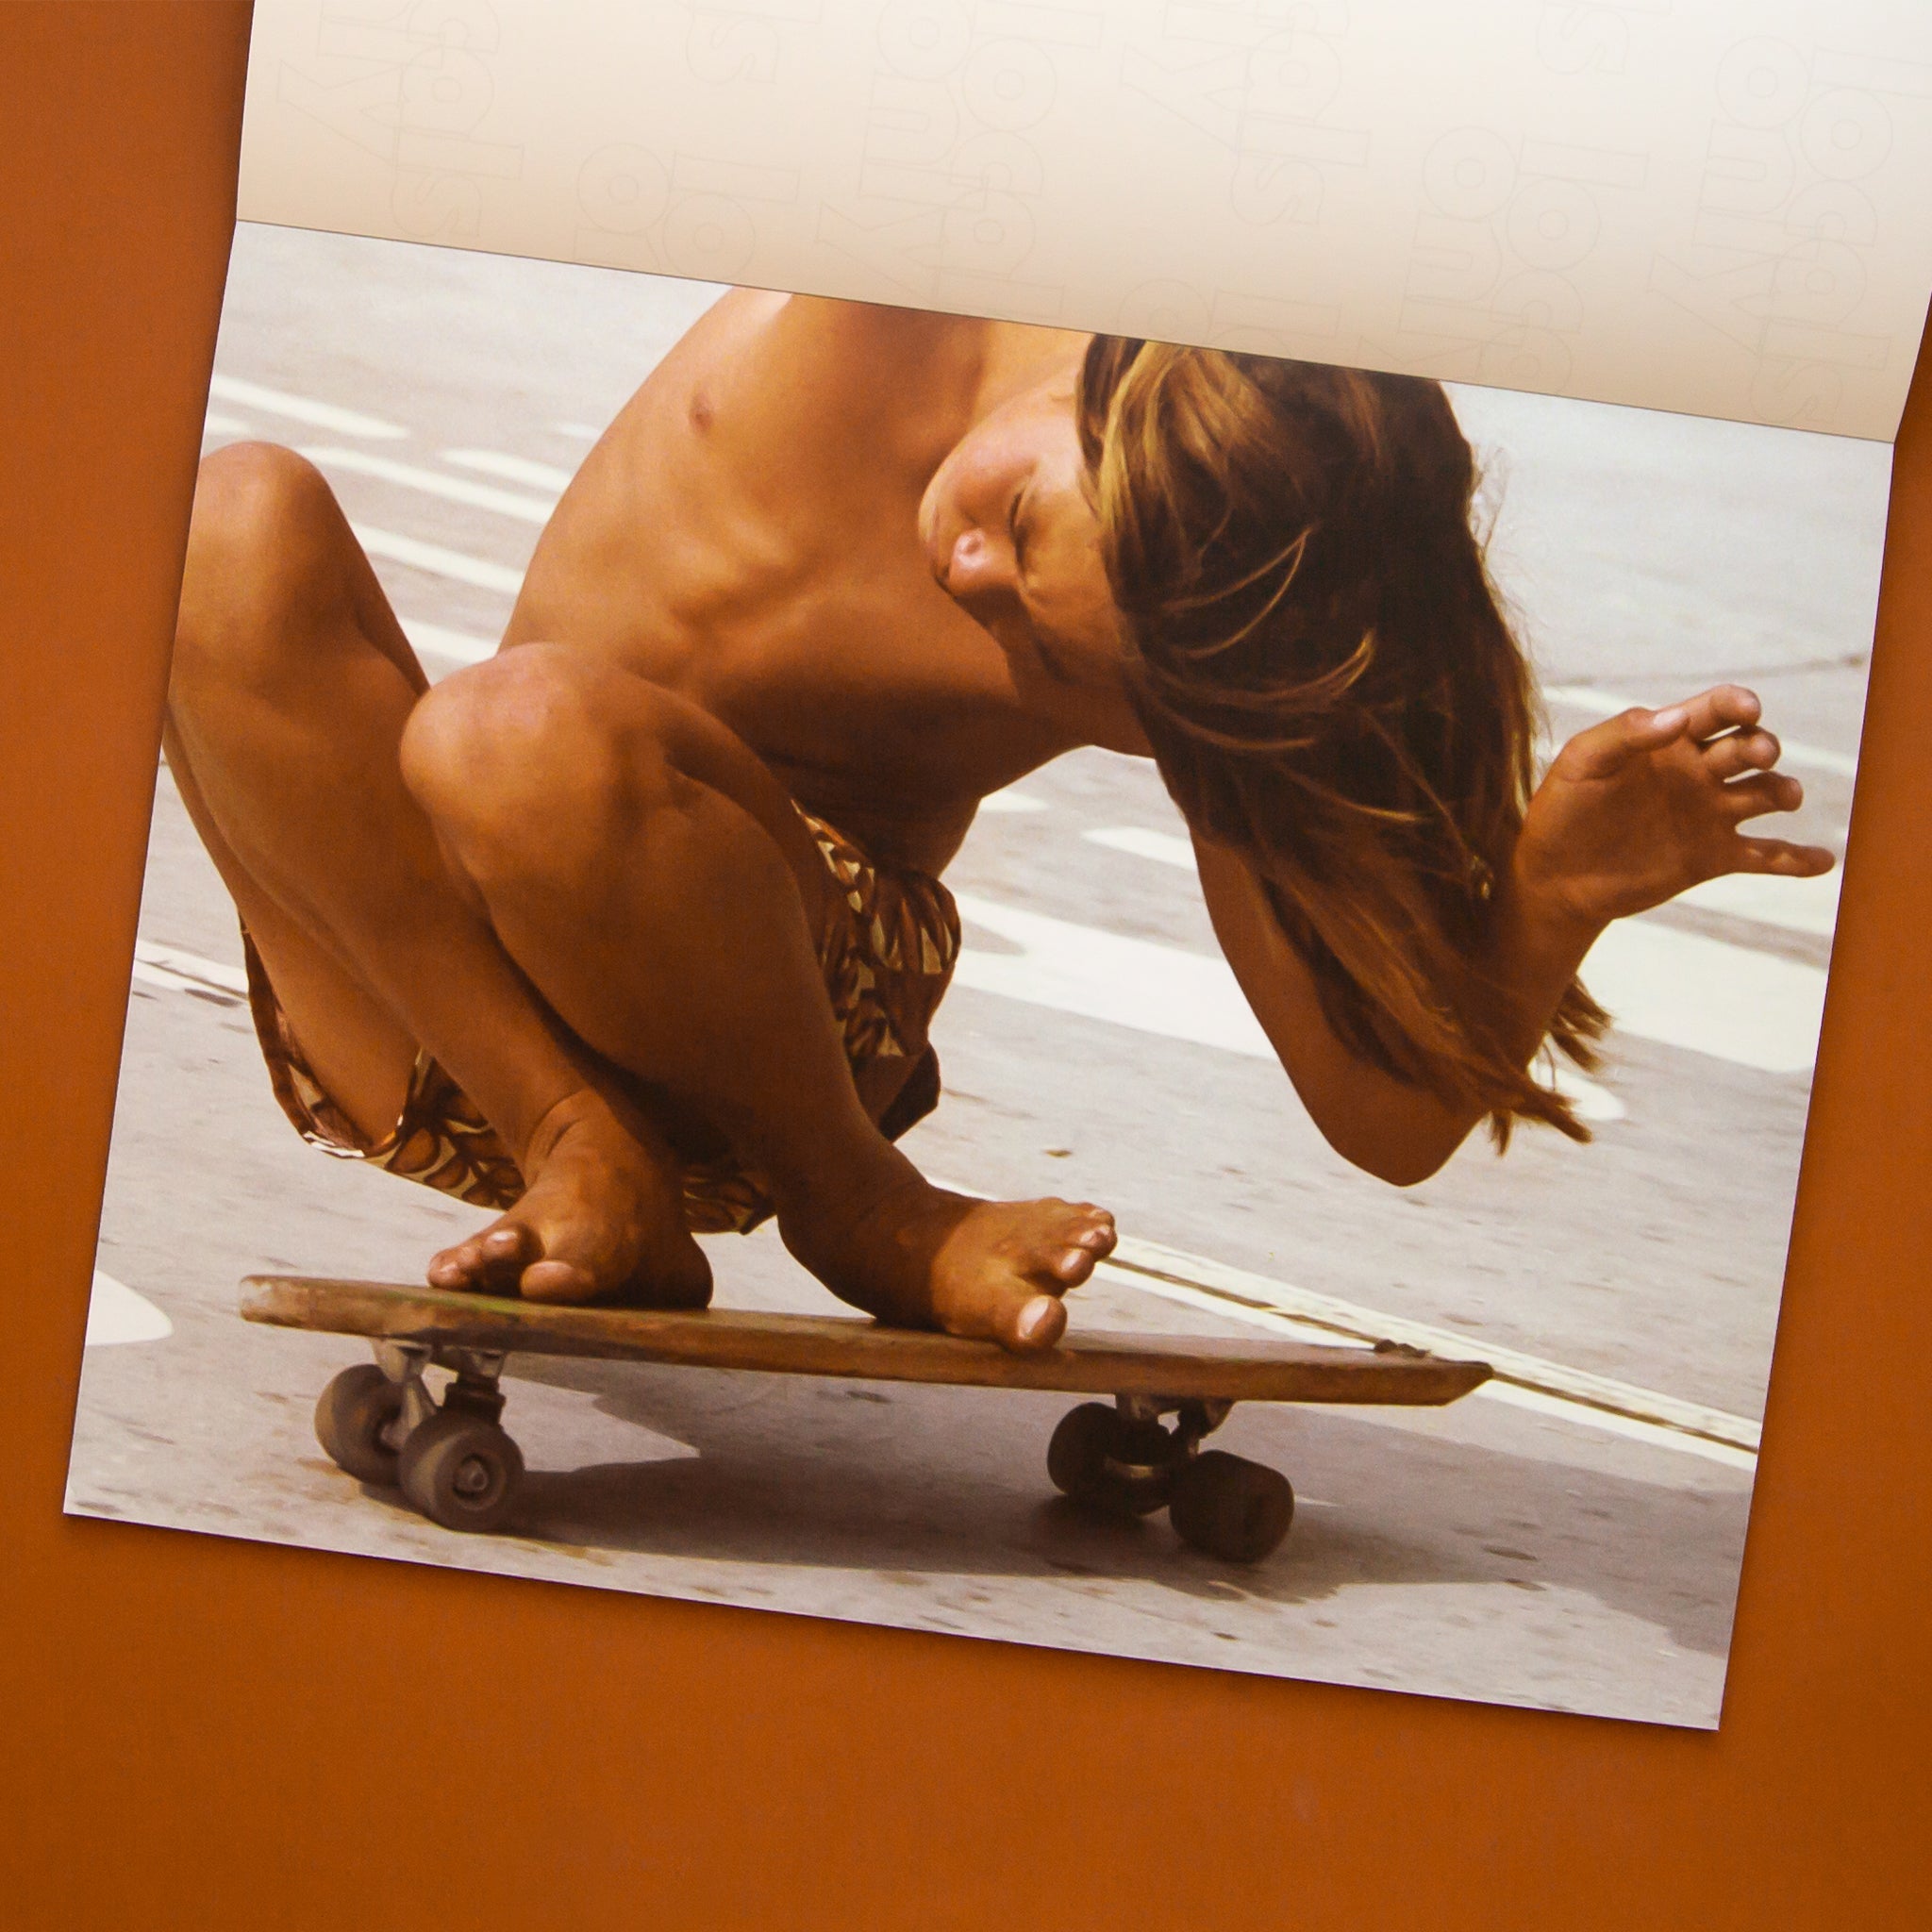 A photo of the inside of the book. This page features a photo of someone skateboarding.